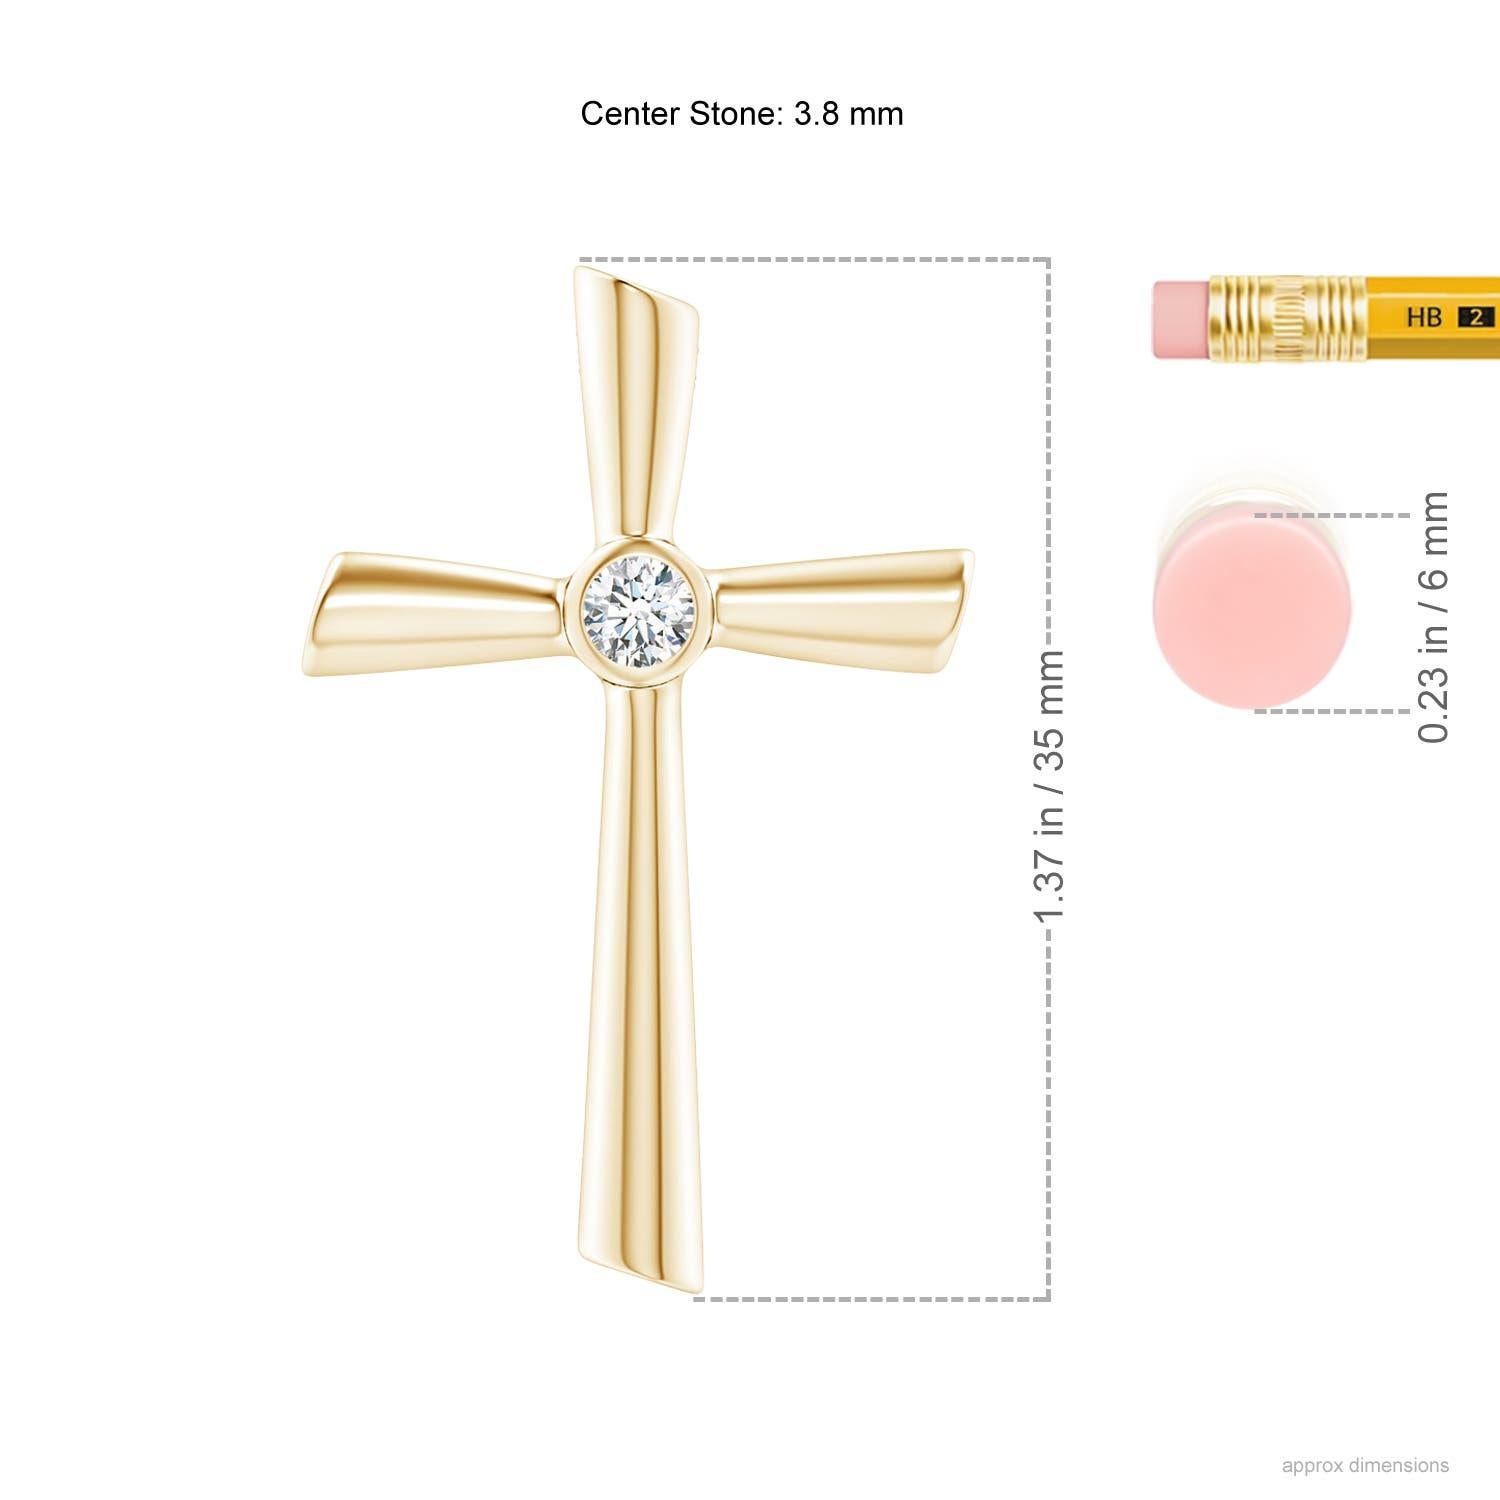 Designed in 14k yellow gold, this diamond crucifix pendant features a twinkling solitaire diamond at the core. The grooves exude a reflective allure that complements the brilliance of the round diamond.
Diamond is the Birthstone for April and